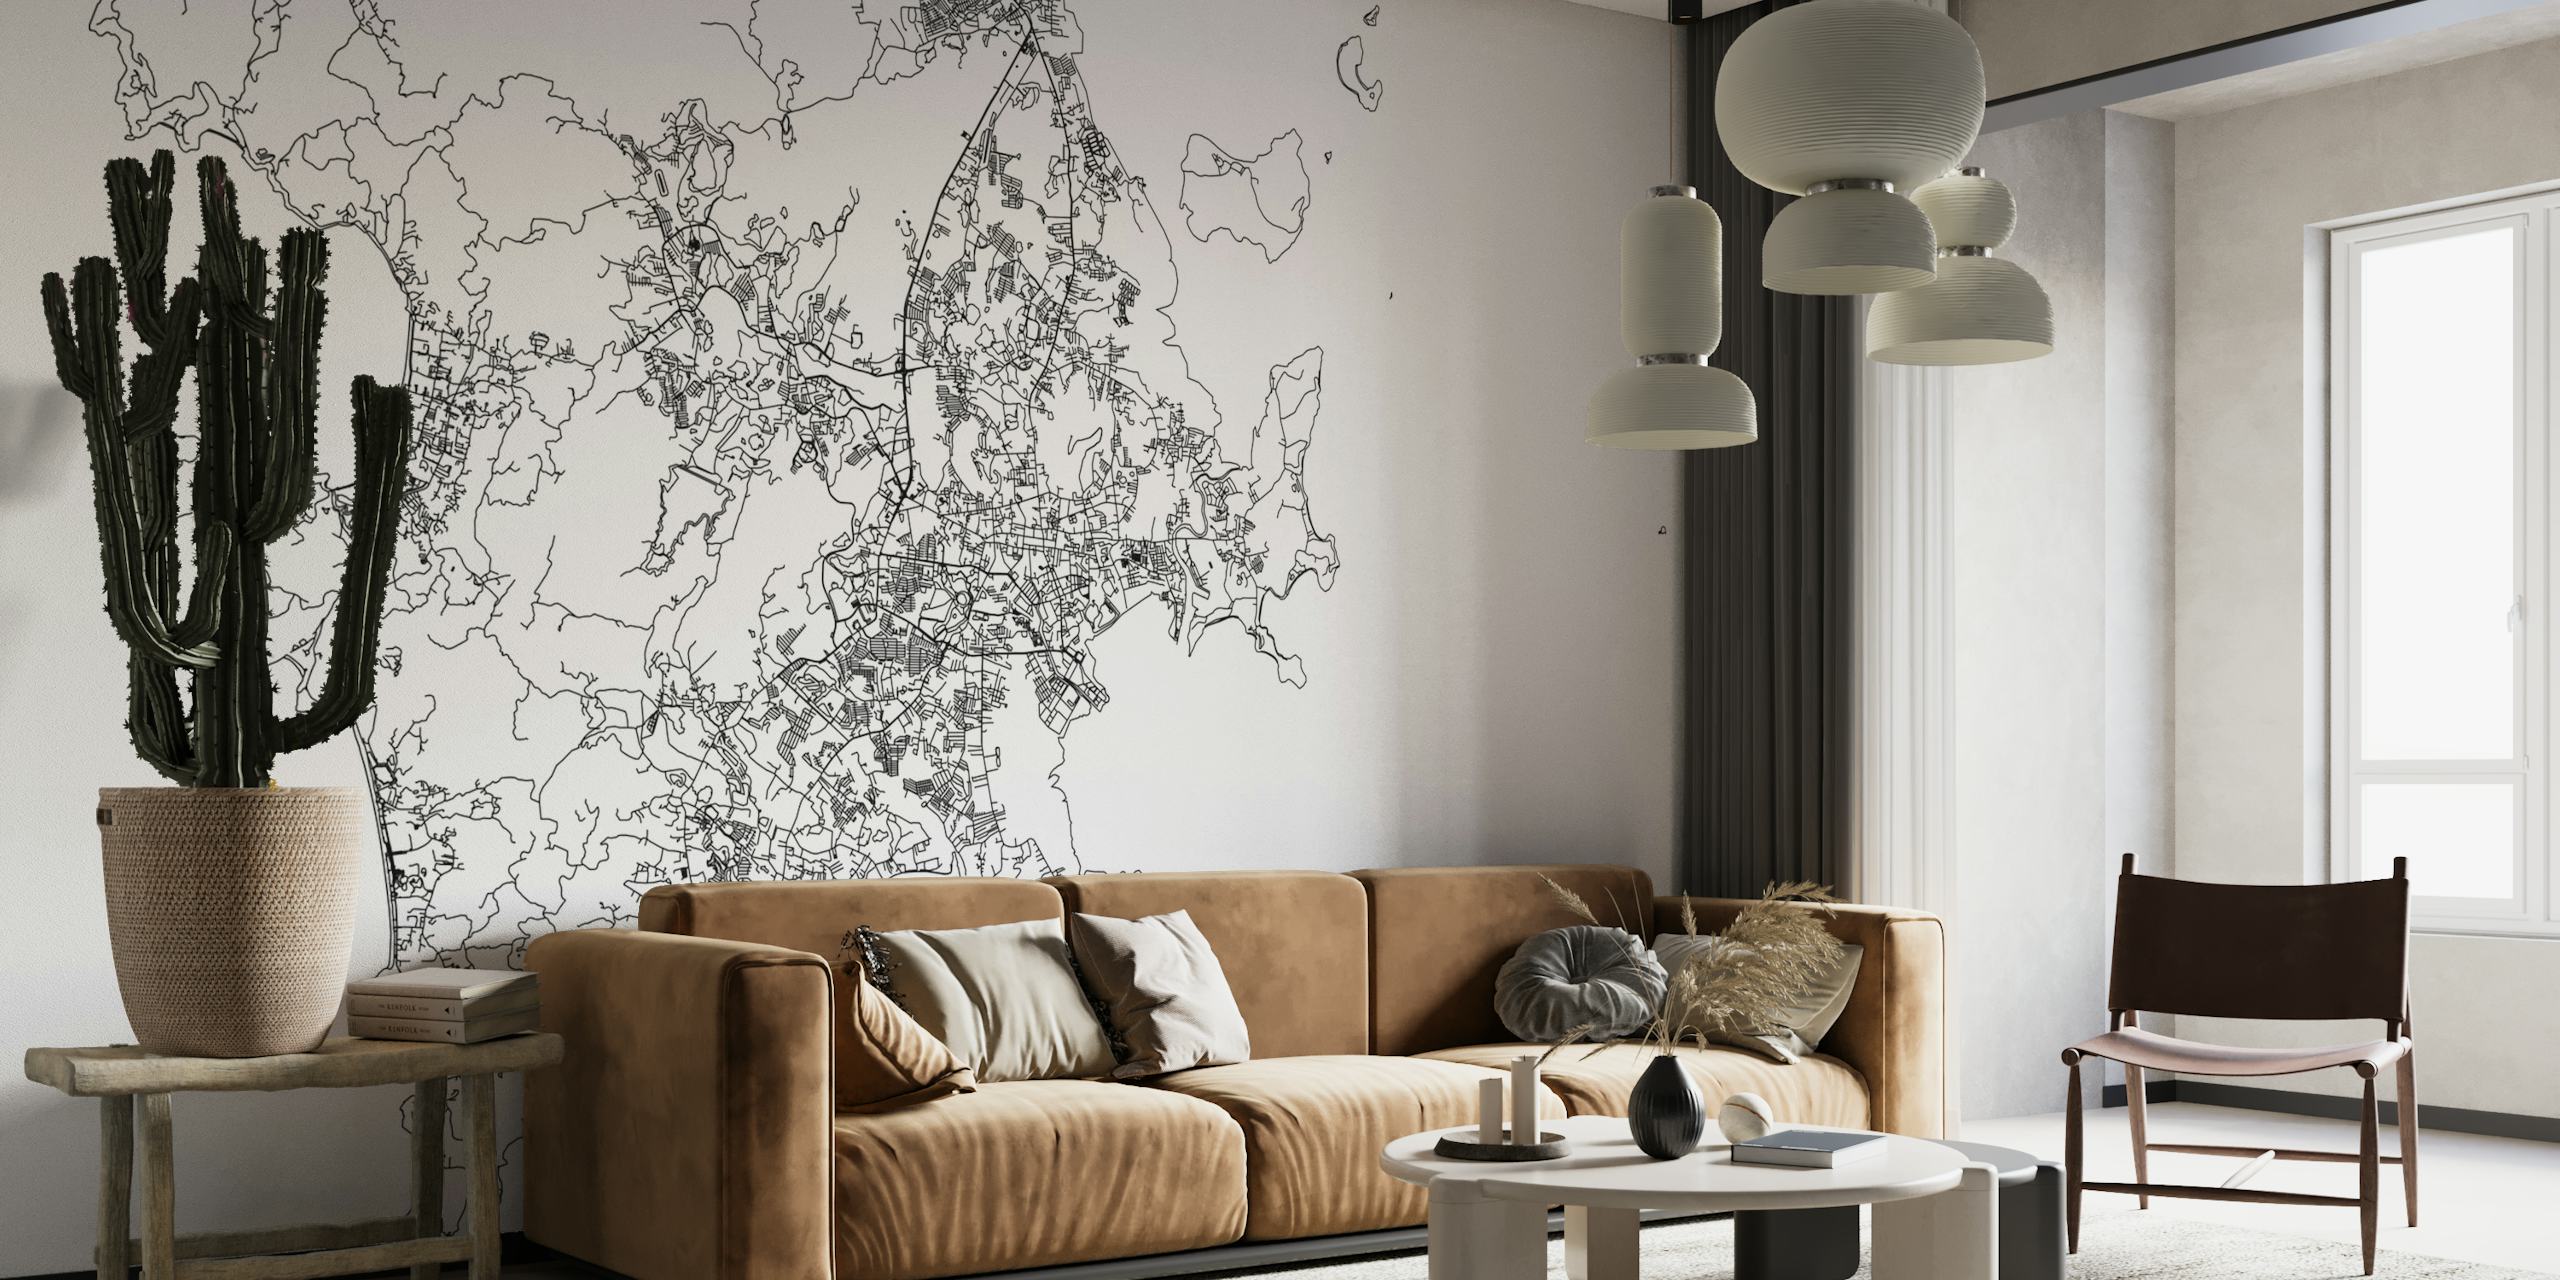 Black and white line drawing map of Phuket for wall mural